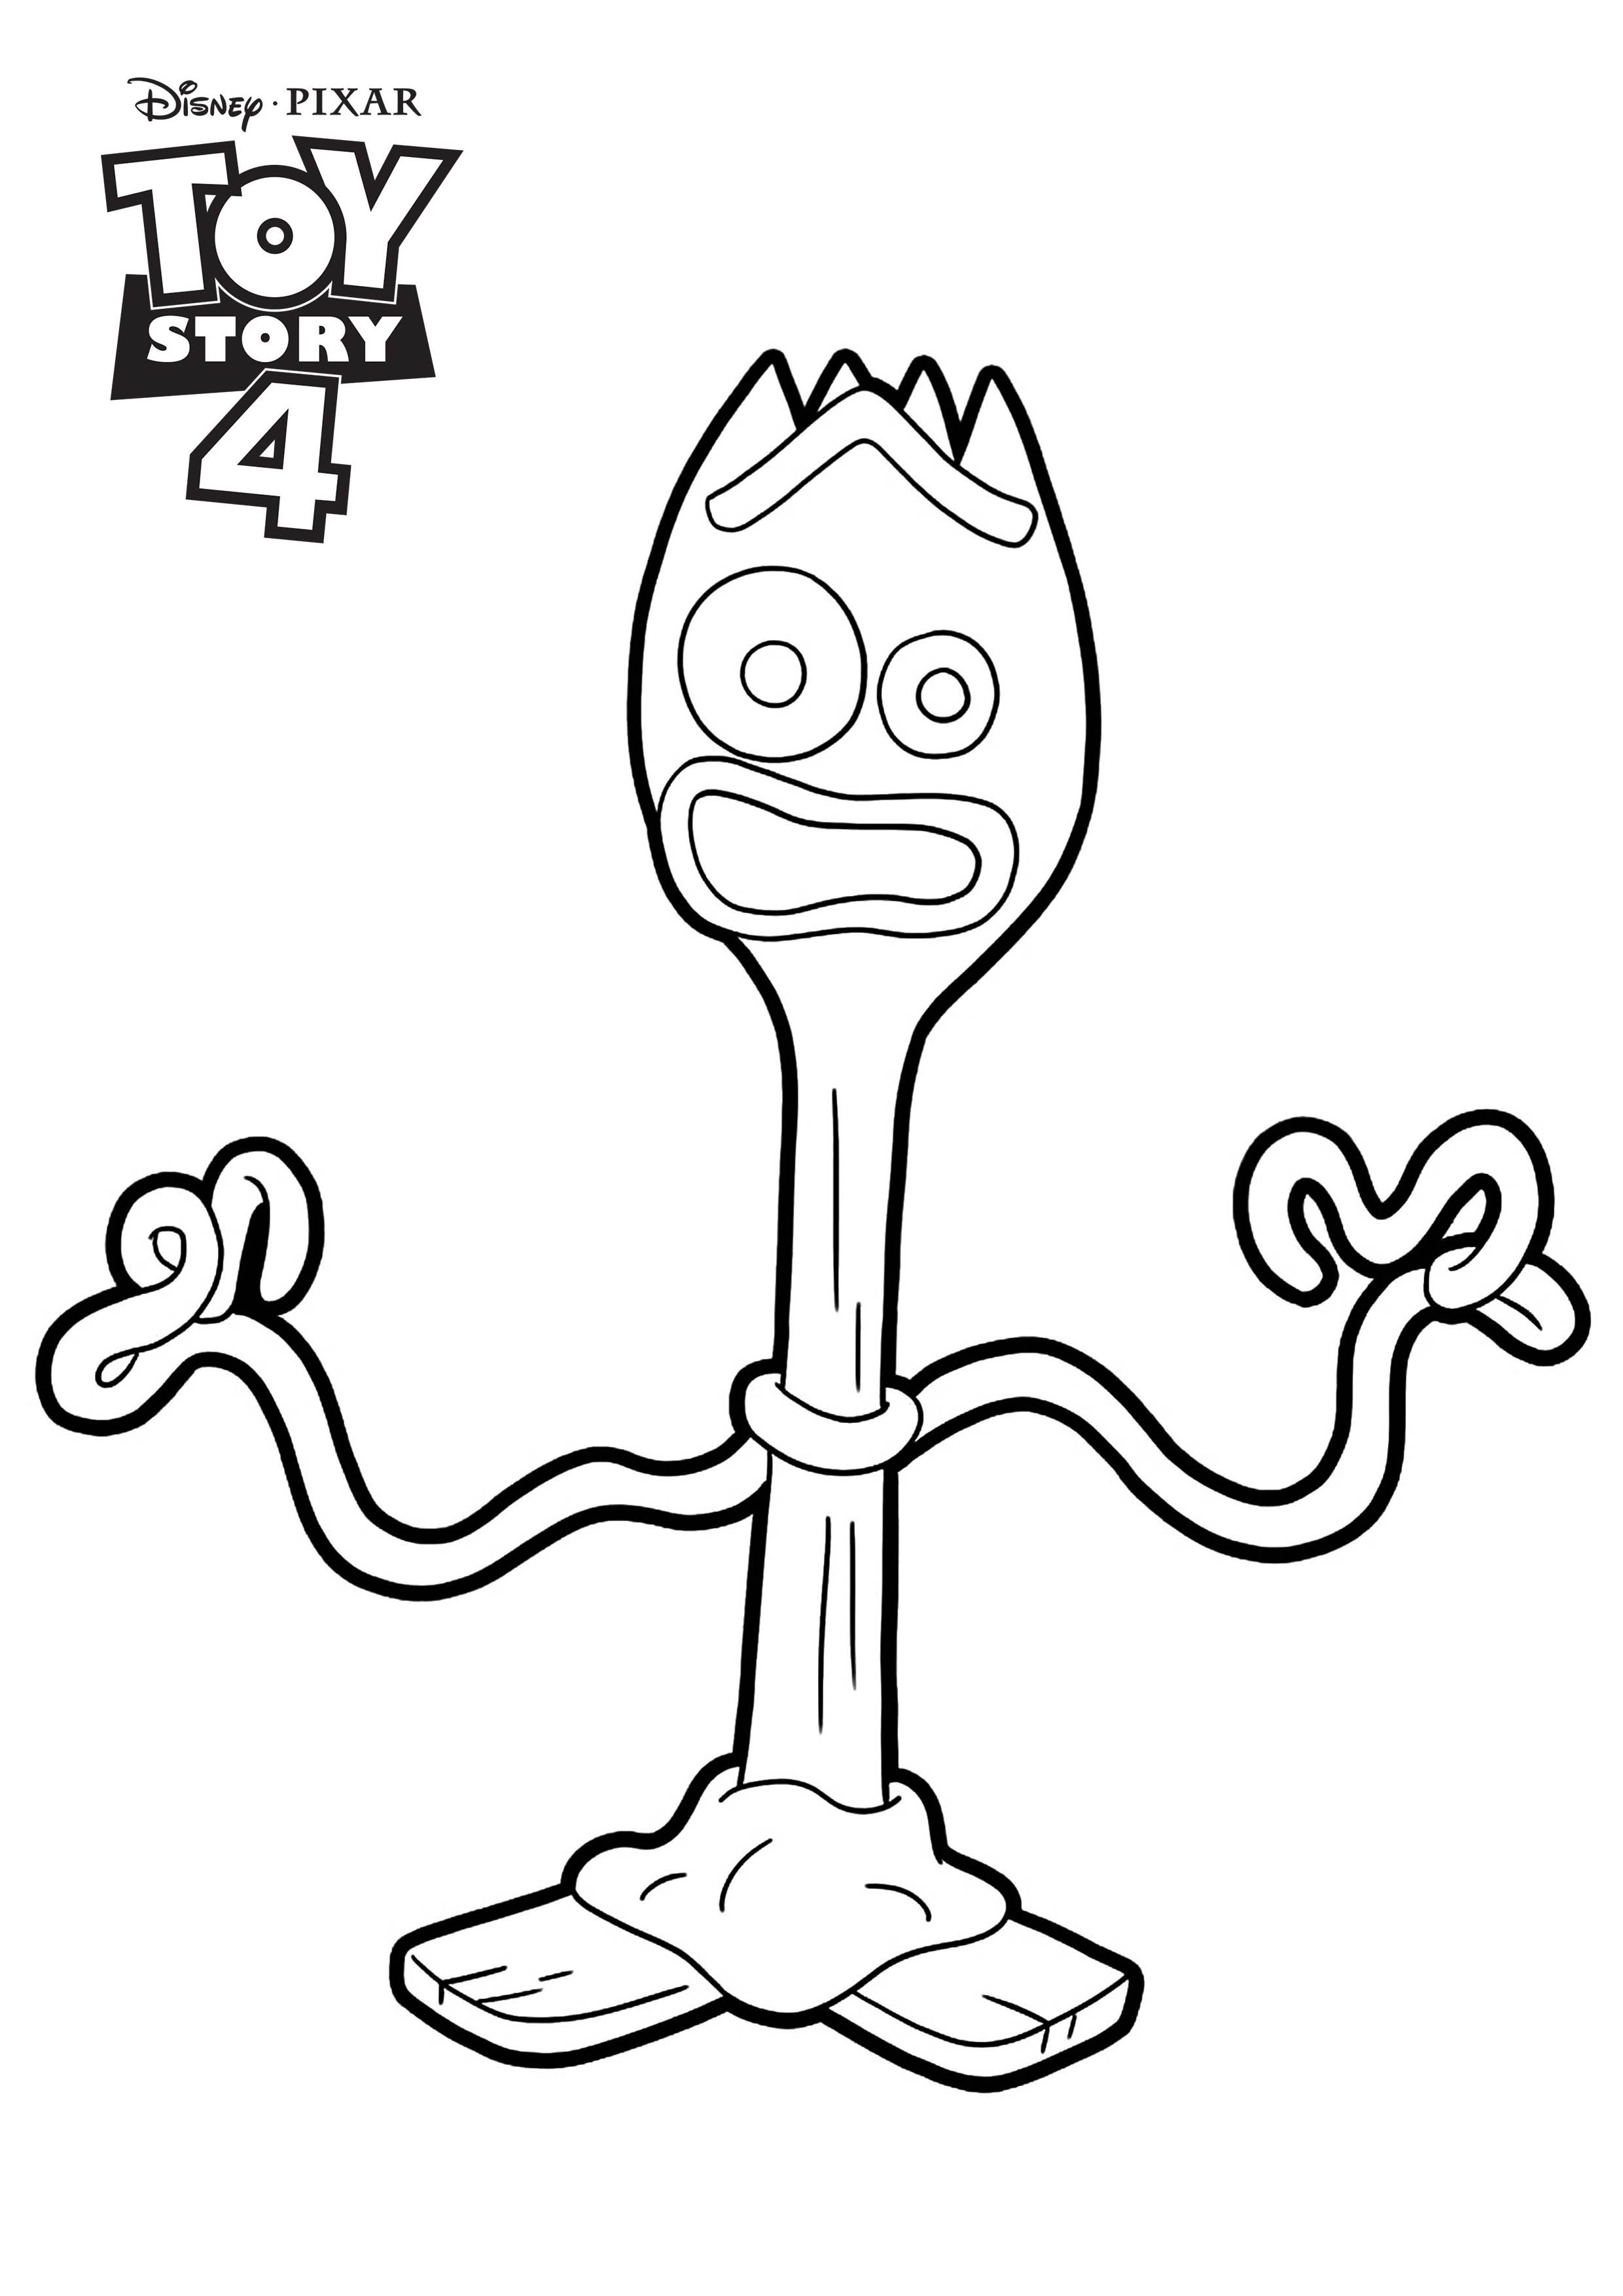 Forky : Toy Story 4 coloring page (Disney / Pixar) - Toy Story 4 Kids